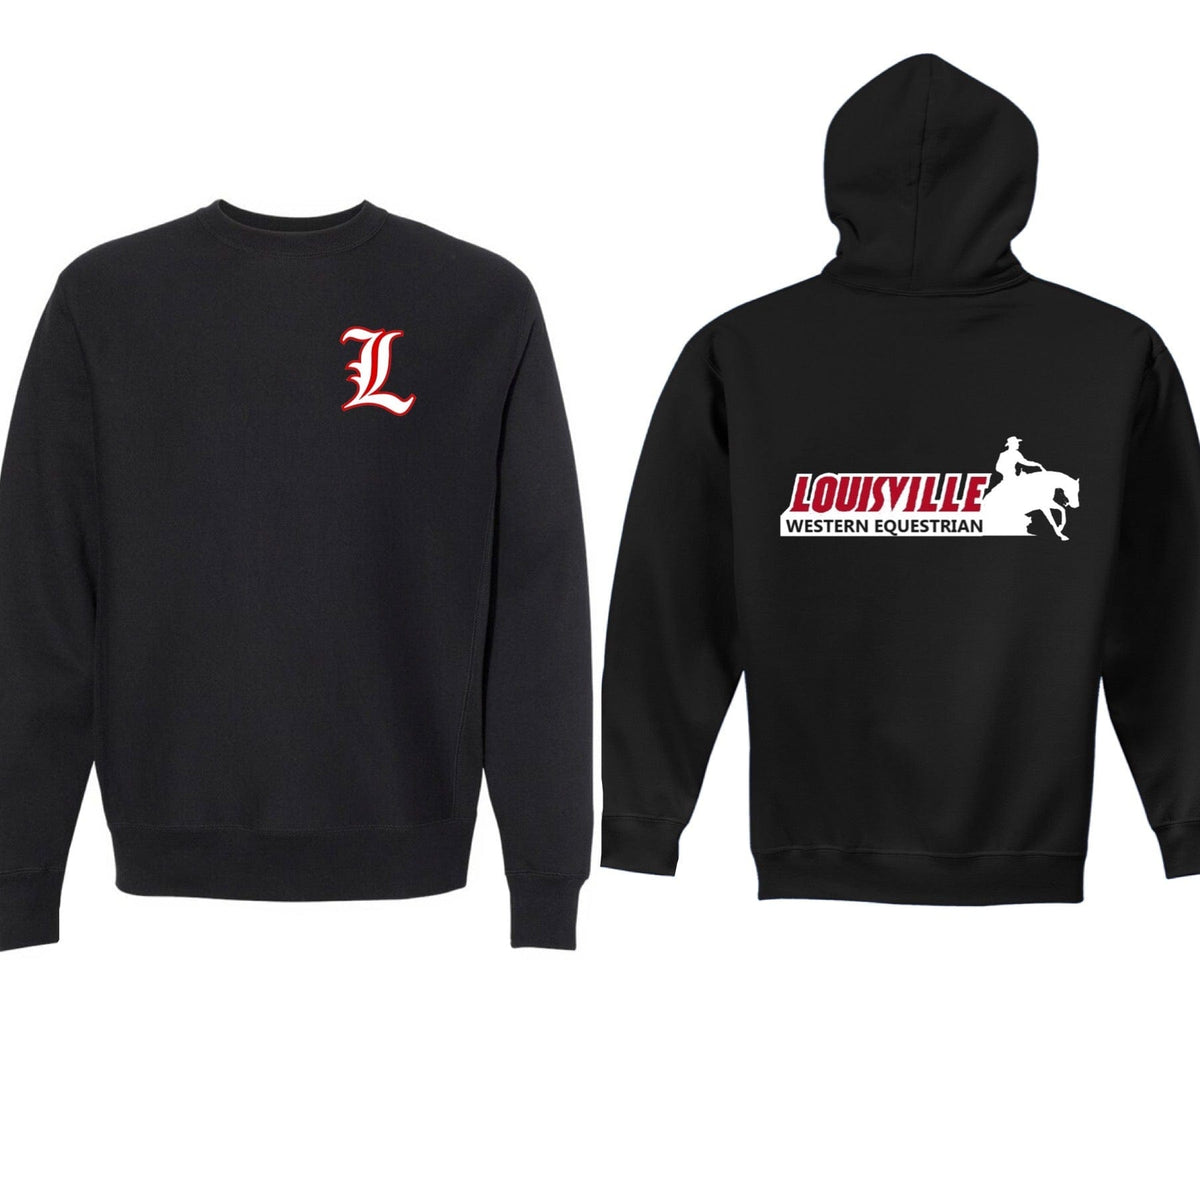 Equestrian Team Apparel Louisville Western Equestrian Team Hoodie and Sweatshirt equestrian team apparel online tack store mobile tack store custom farm apparel custom show stable clothing equestrian lifestyle horse show clothing riding clothes horses equestrian tack store